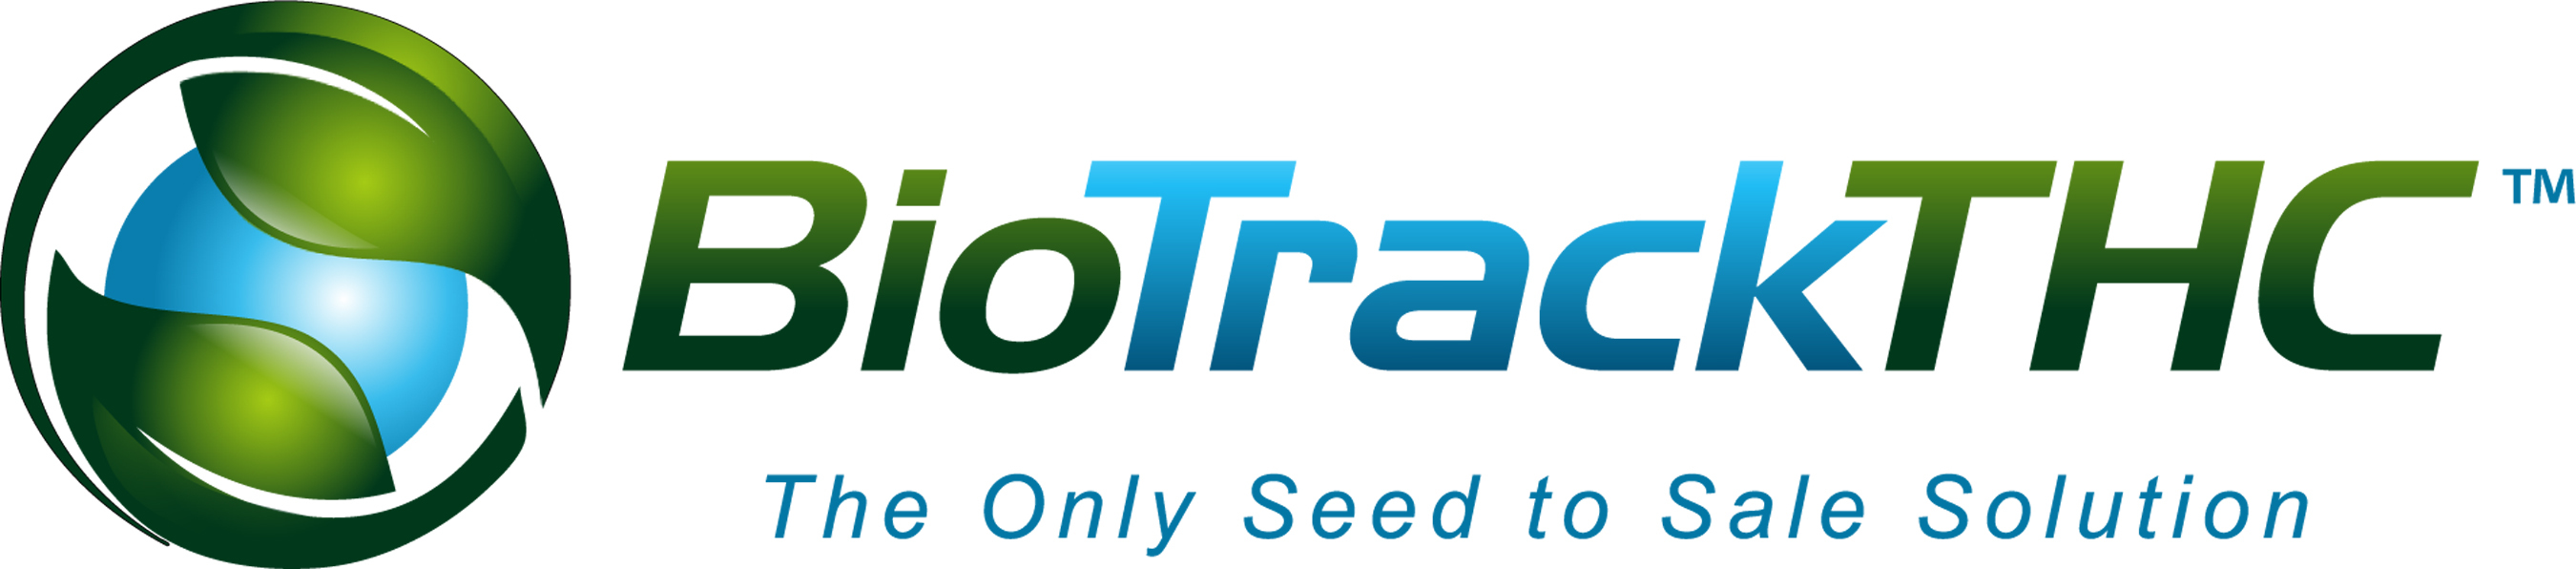 The world's largest Seed to Sale Solution deployed in more than 800 locations in 15 states, Washington D.C., Canada, & South America.